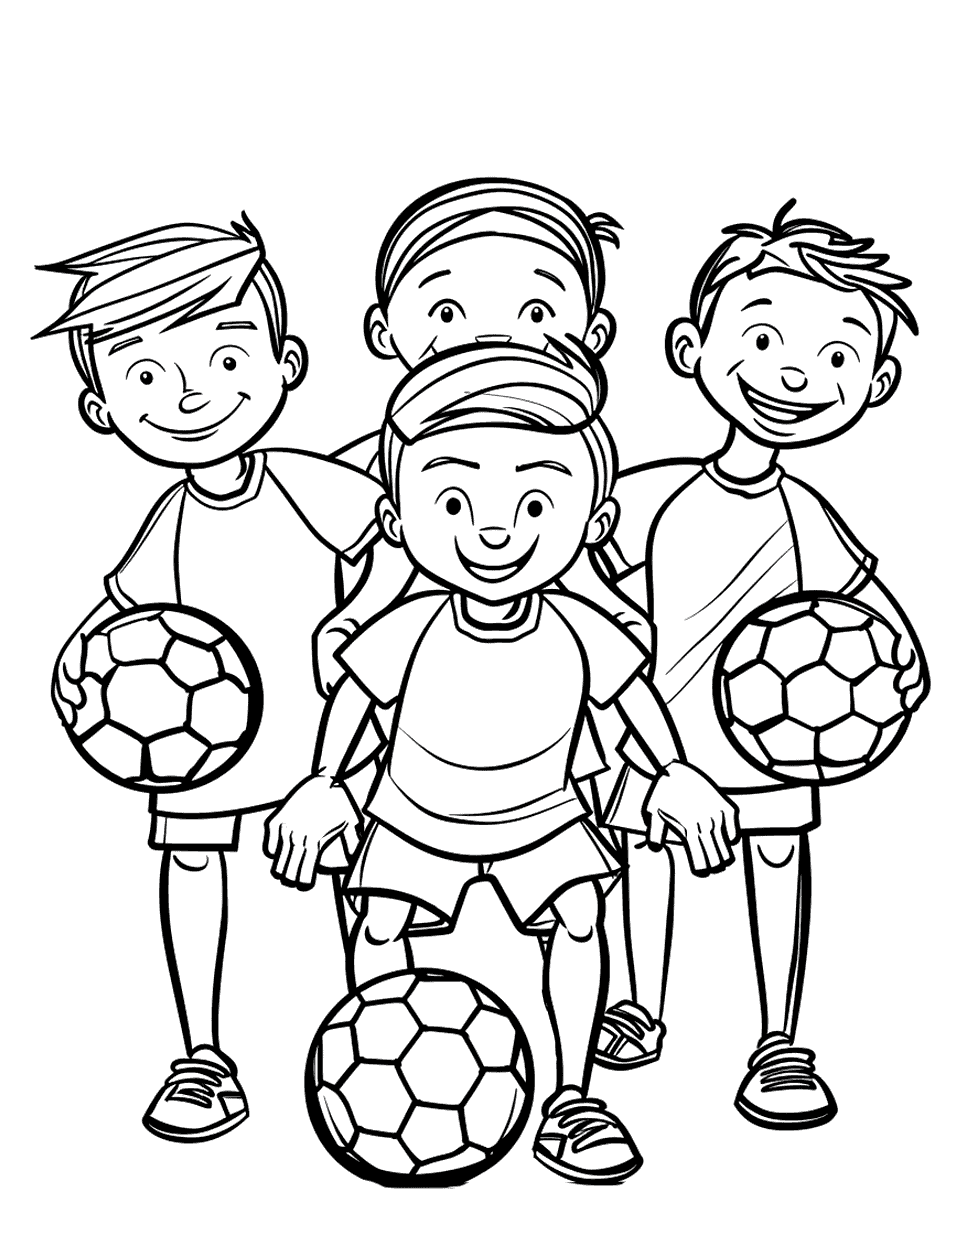 Kids Soccer Team Photo Coloring Page - A kids’ soccer team posing for a team photo, smiling and holding their soccer balls.